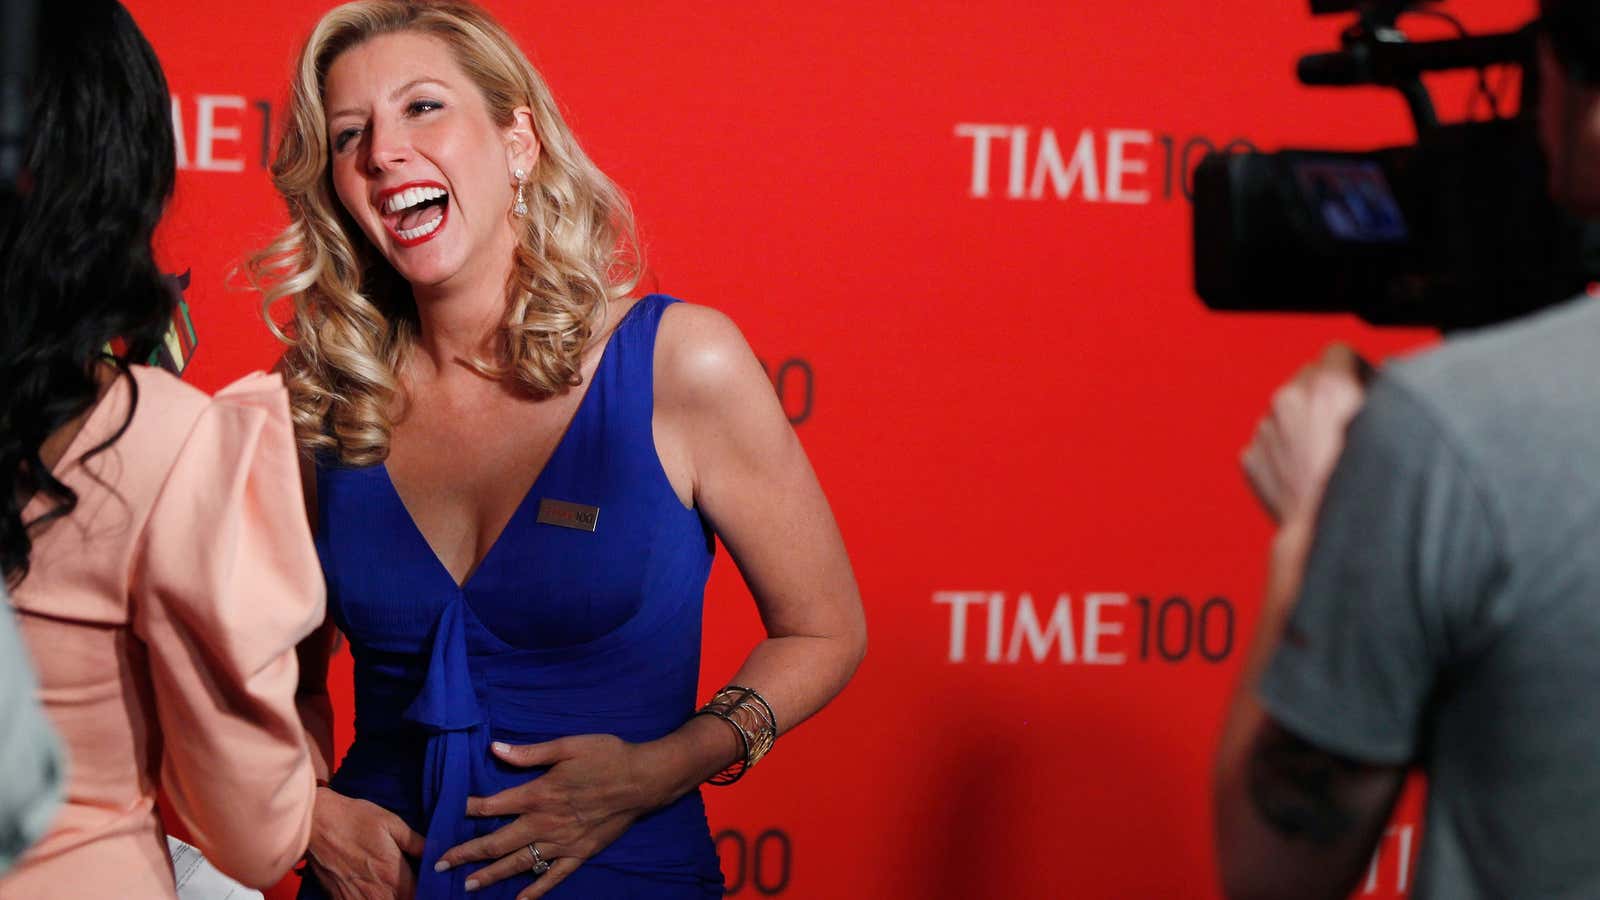 What does an entrepreneur look like? Spanx founder Sara Blakely, for starters.